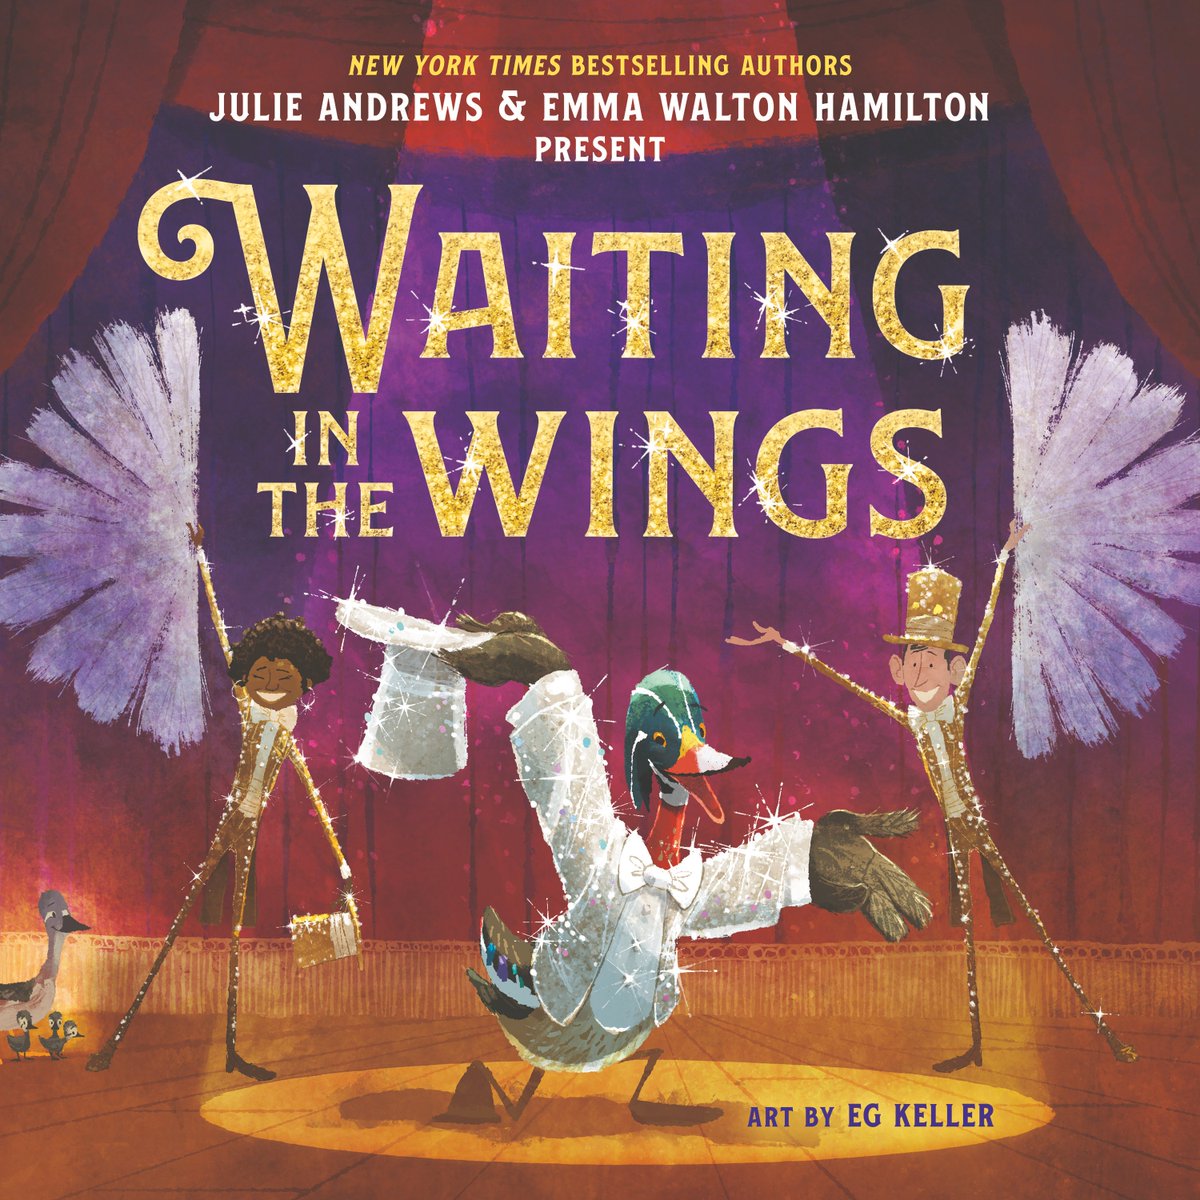 Happy Book Birthday to WAITING IN THE WINGS! Officially on sale today at your favorite bookstore! - Team Julie 🥳